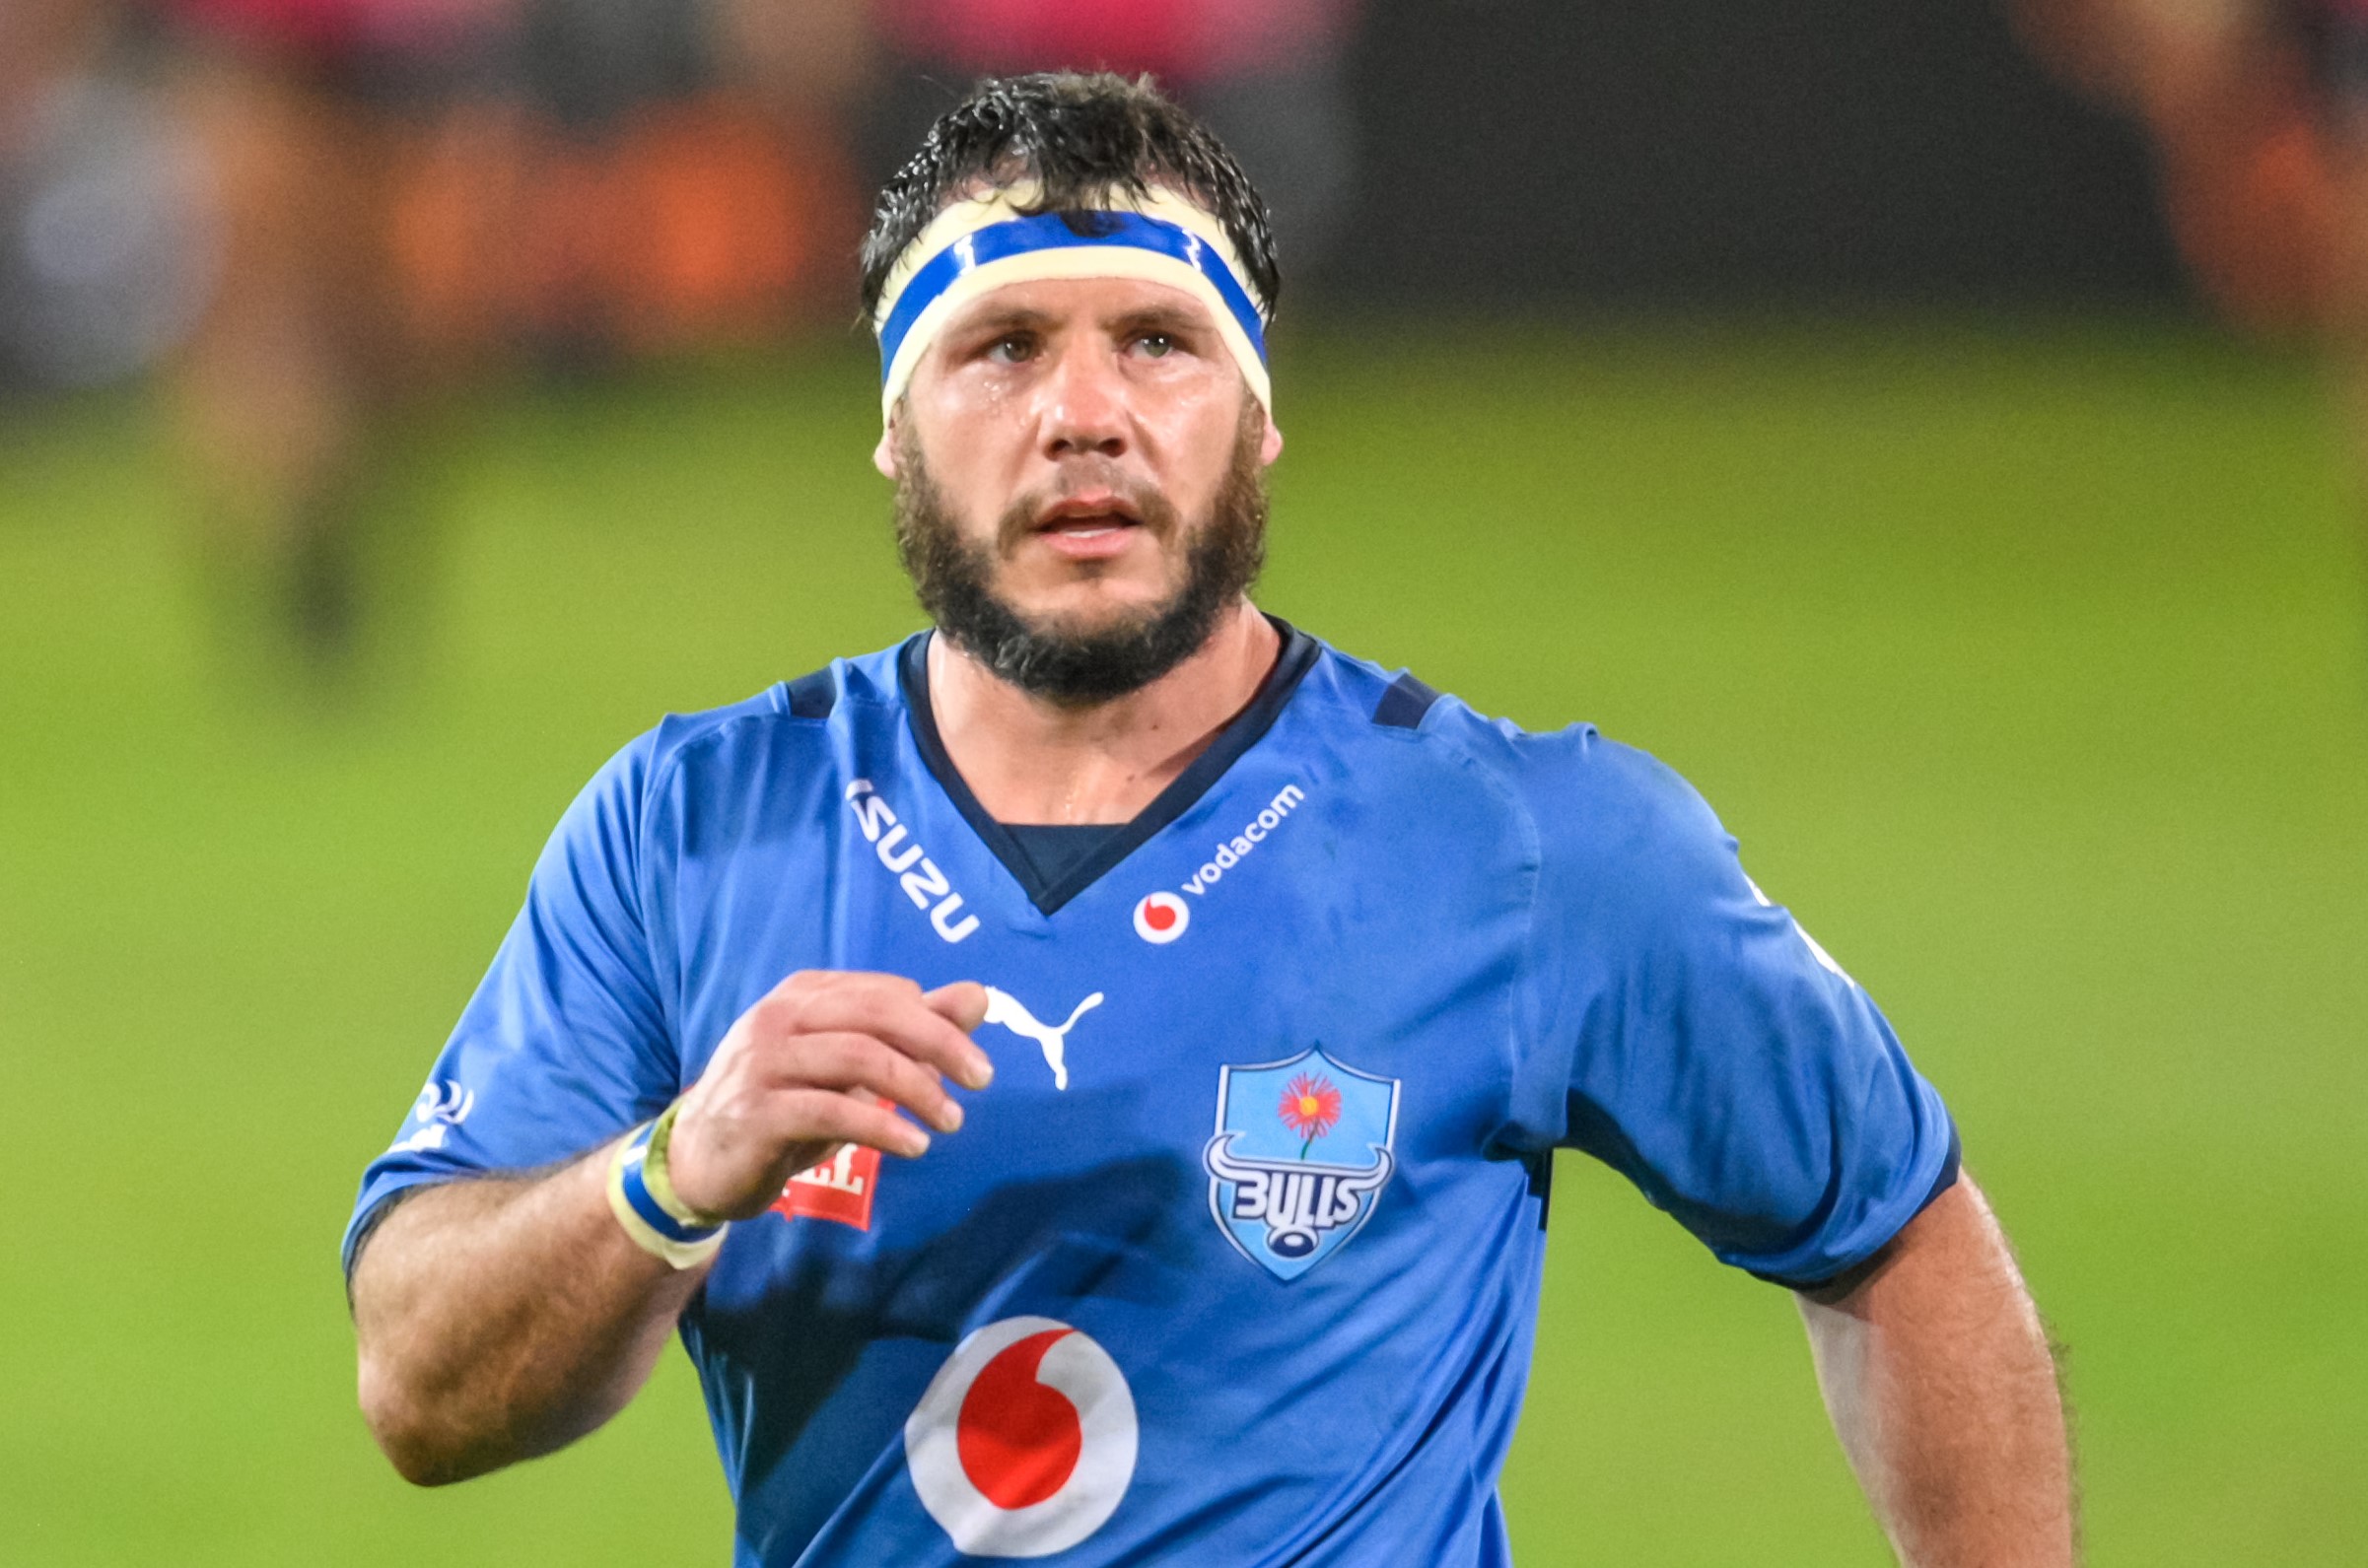 PRETORIA, SOUTH AFRICA - JUNE 25:  Marcell Coetzee (C) of the Vodacom Bulls during the Carling Currie Cup match between Vodacom Bulls and New Nation Pumas at Loftus Versfeld on June 25, 2021 in Pretoria, South Africa. (Photo by Christiaan Kotze/Gallo Images)